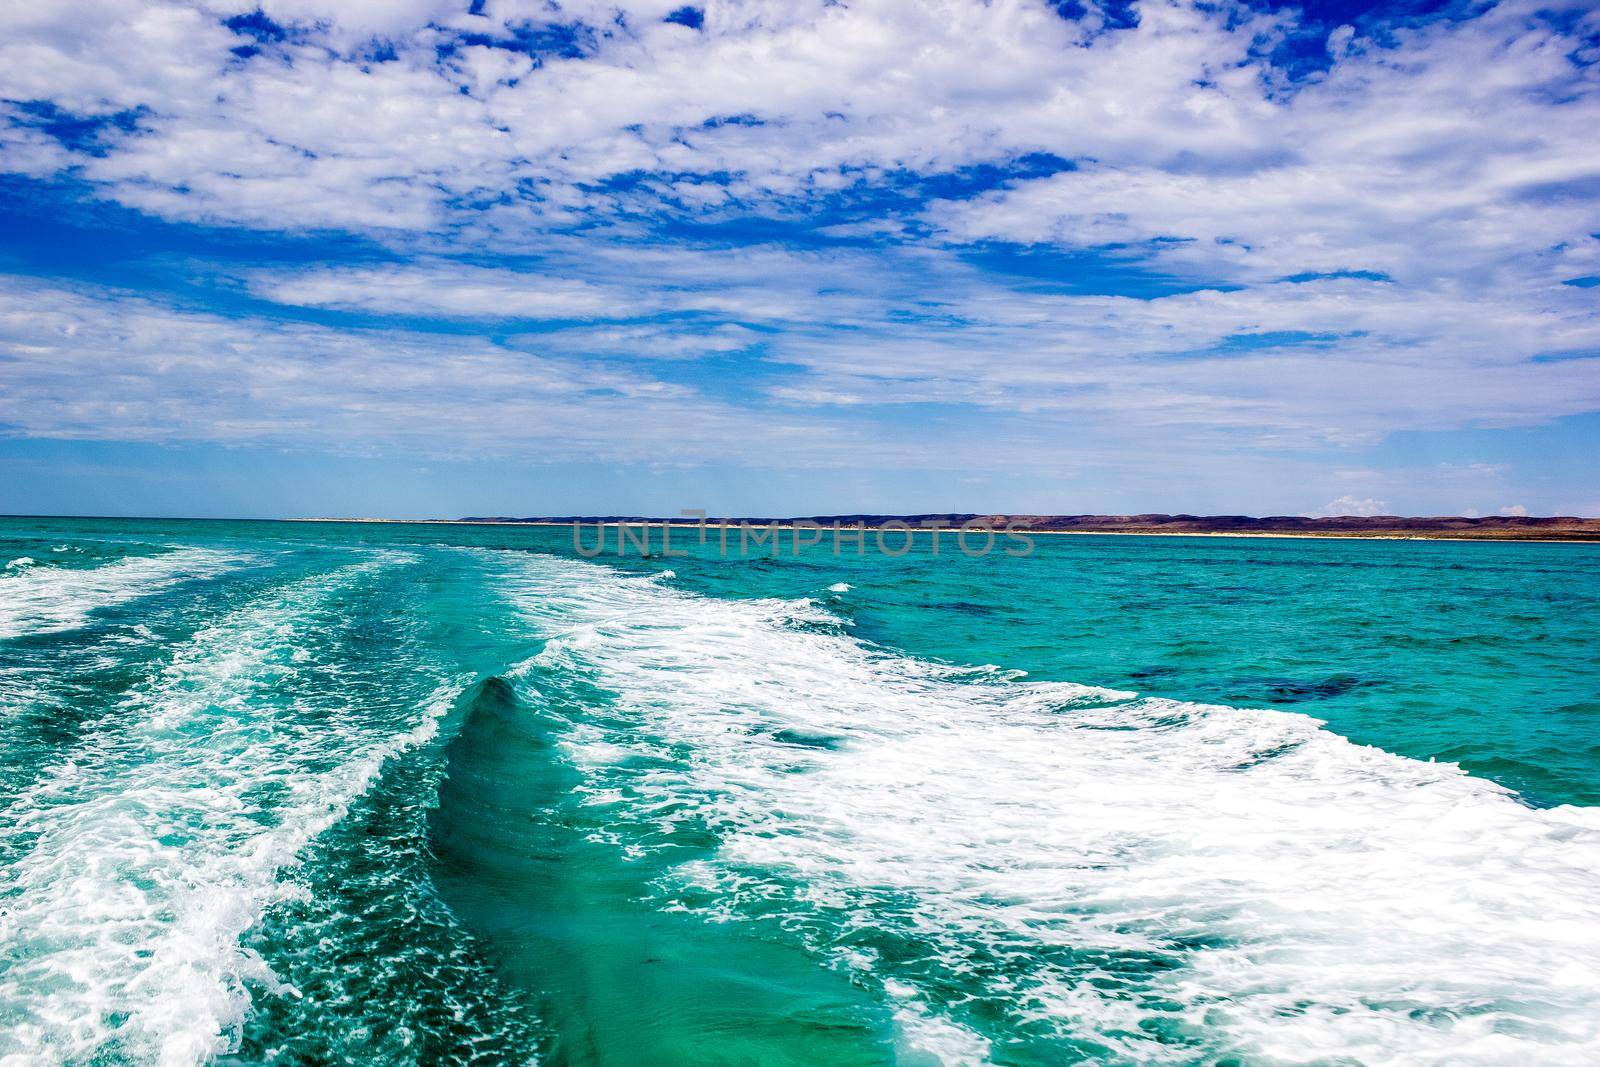 Trail on water surface behind of fast moving motor boat, Western Australia by bettercallcurry